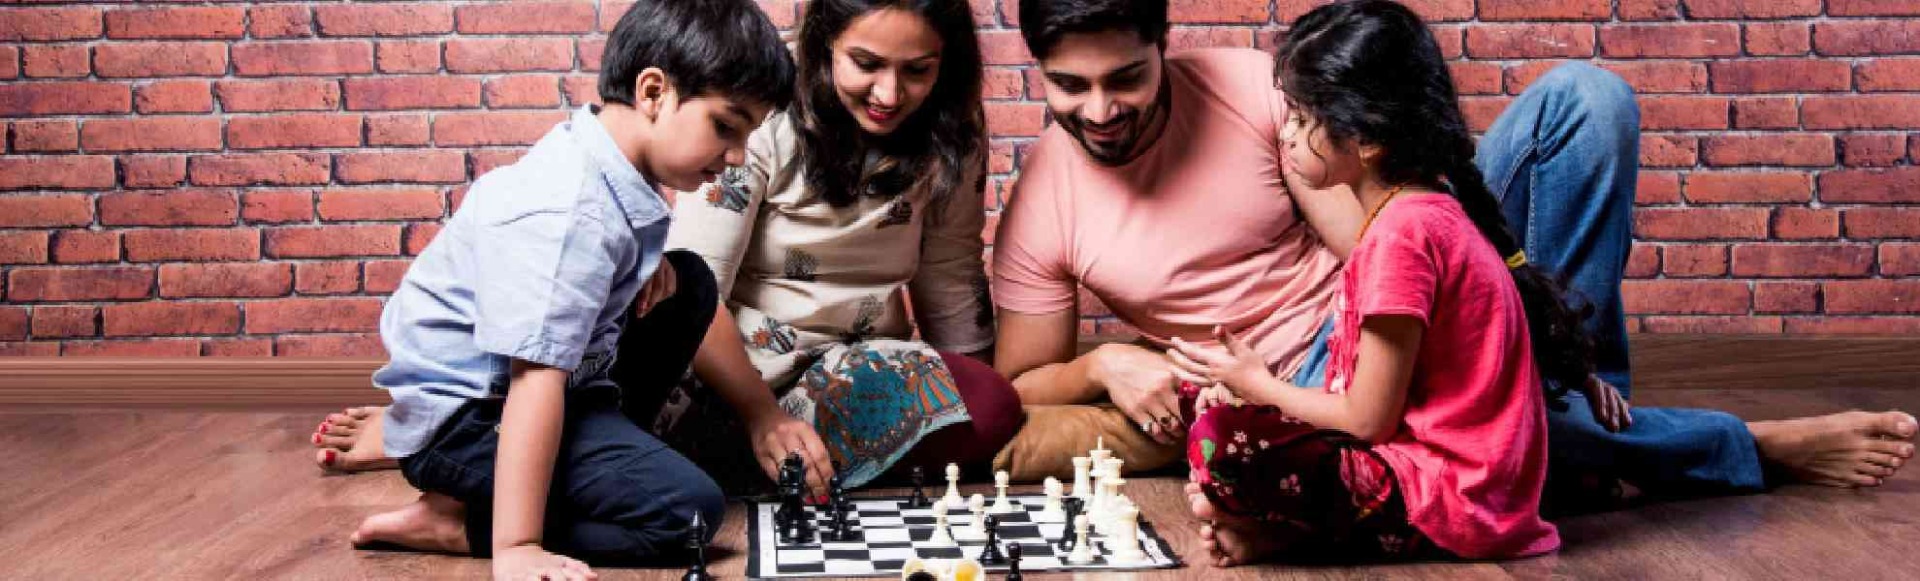 Families enjoy board games together, gaining benefits for everyone involved